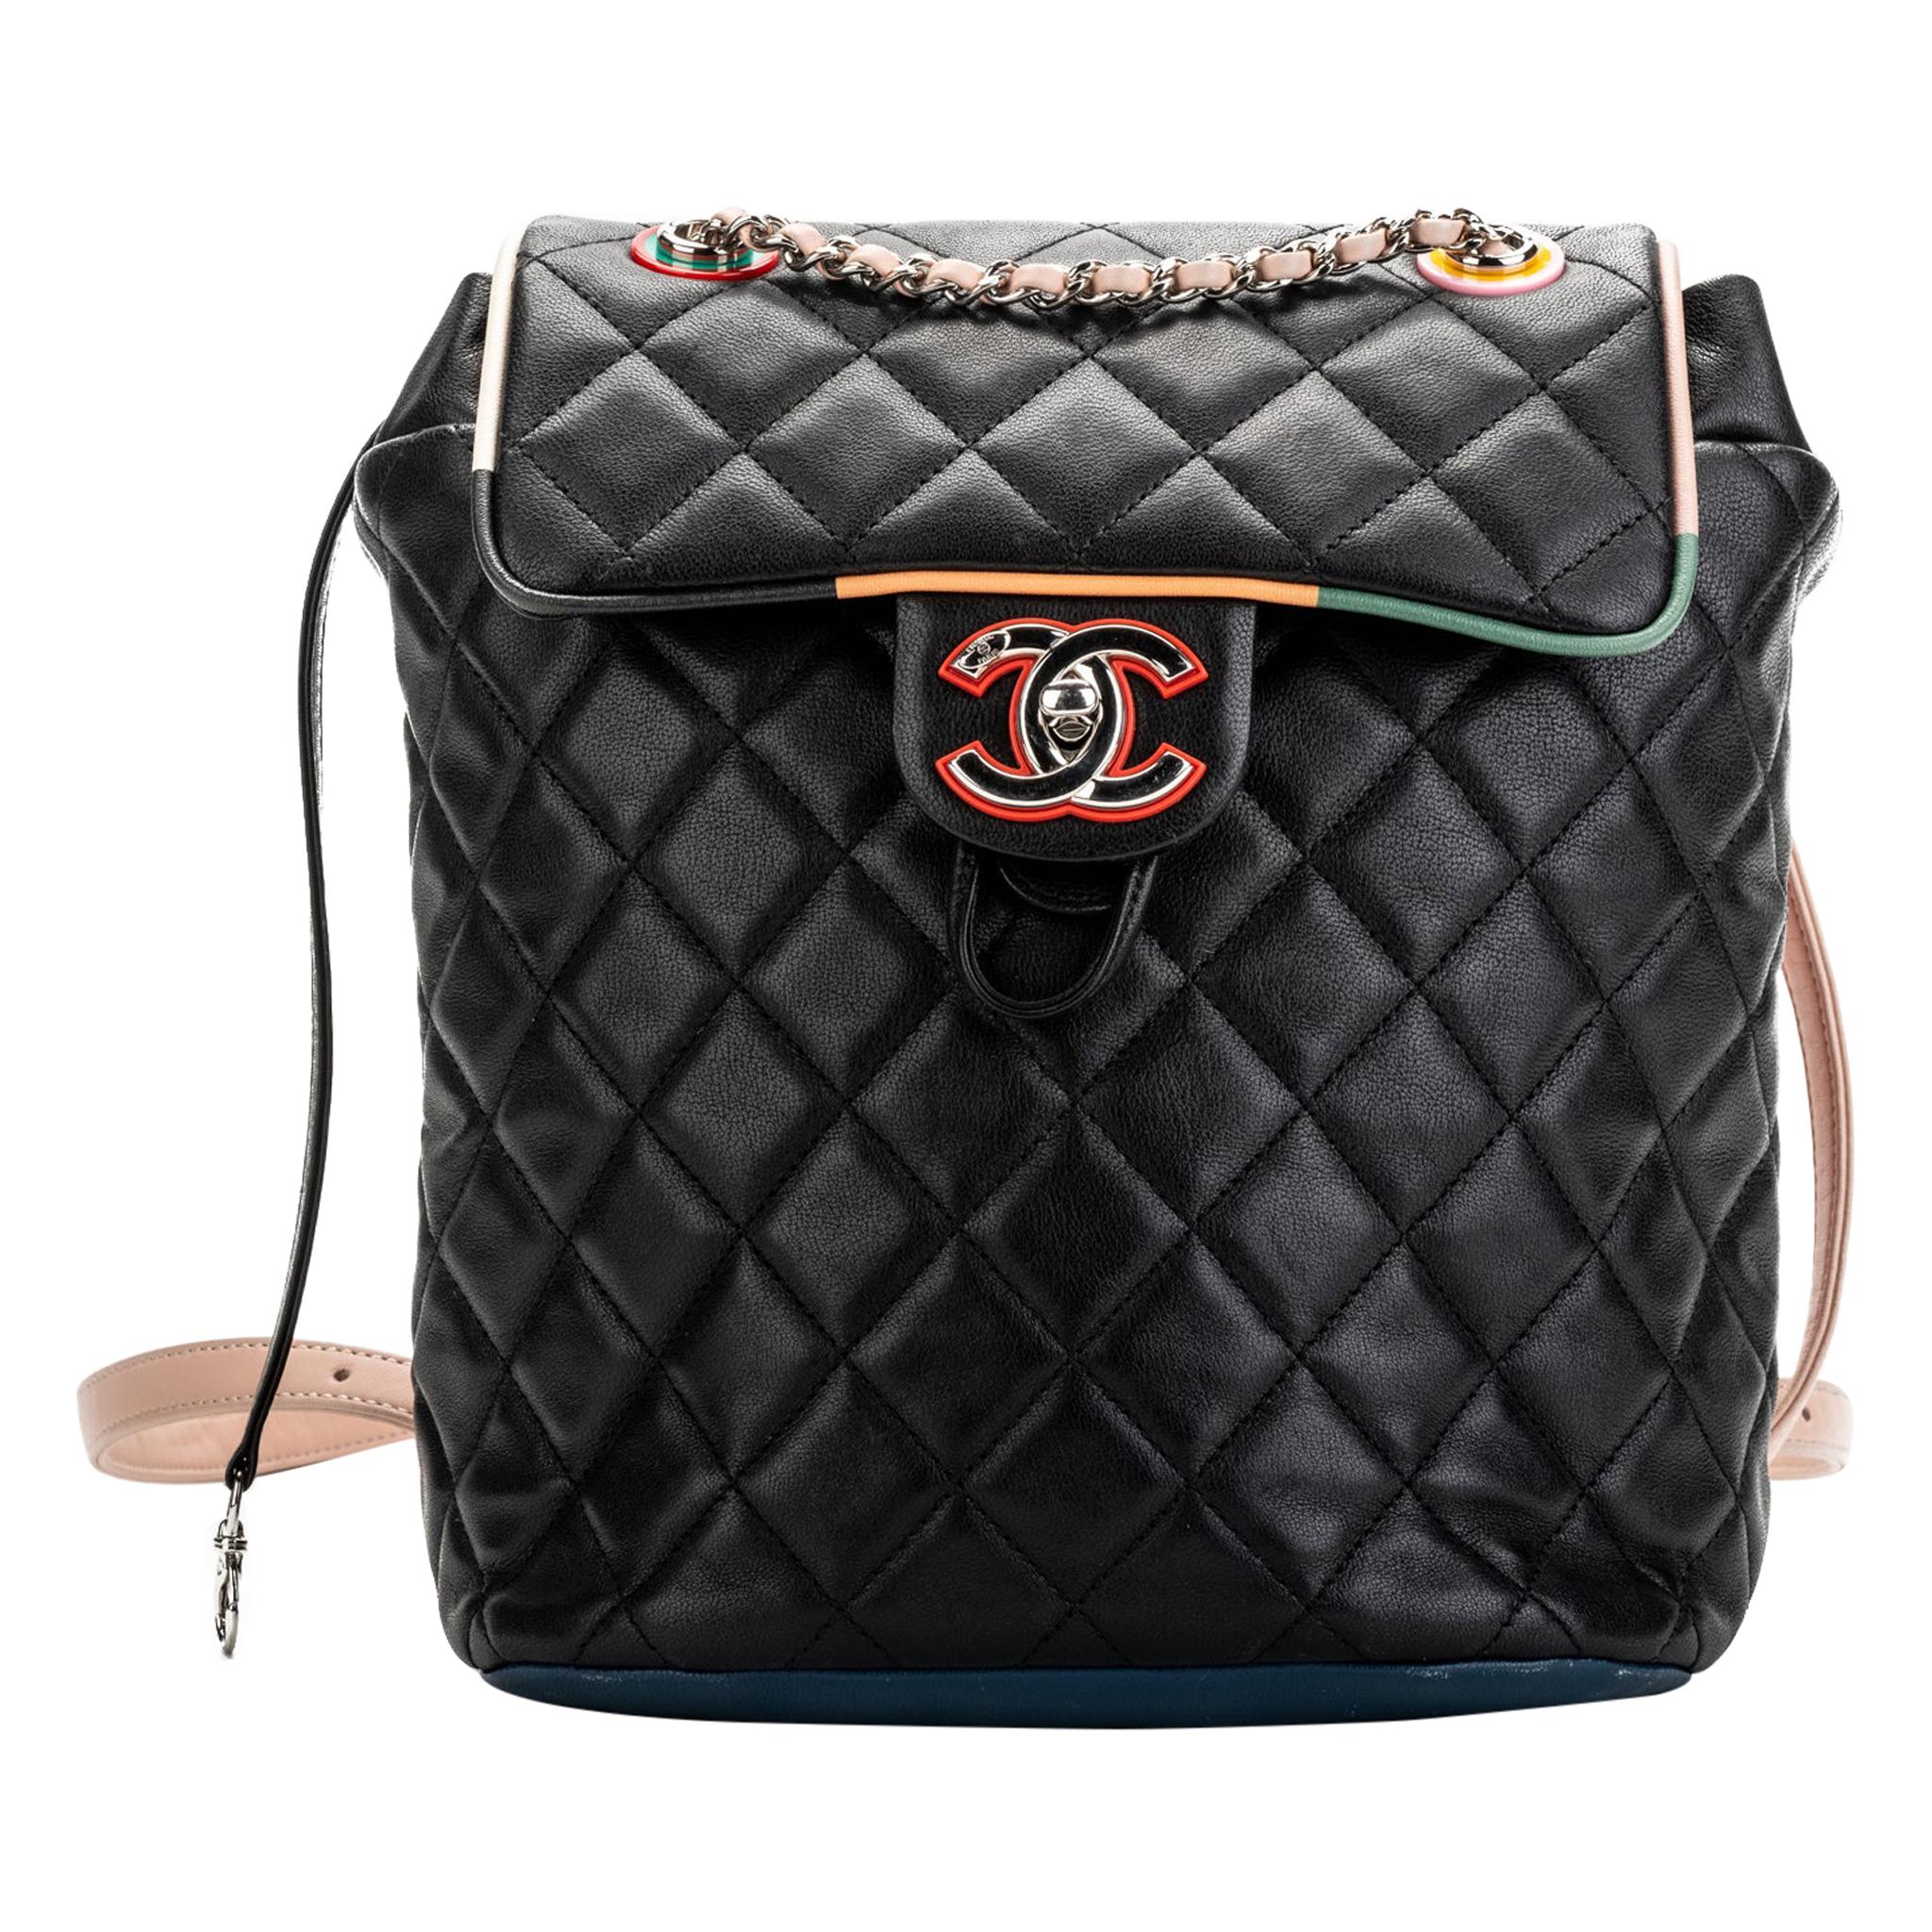 New Chanel Multicolor Quilted Backpack